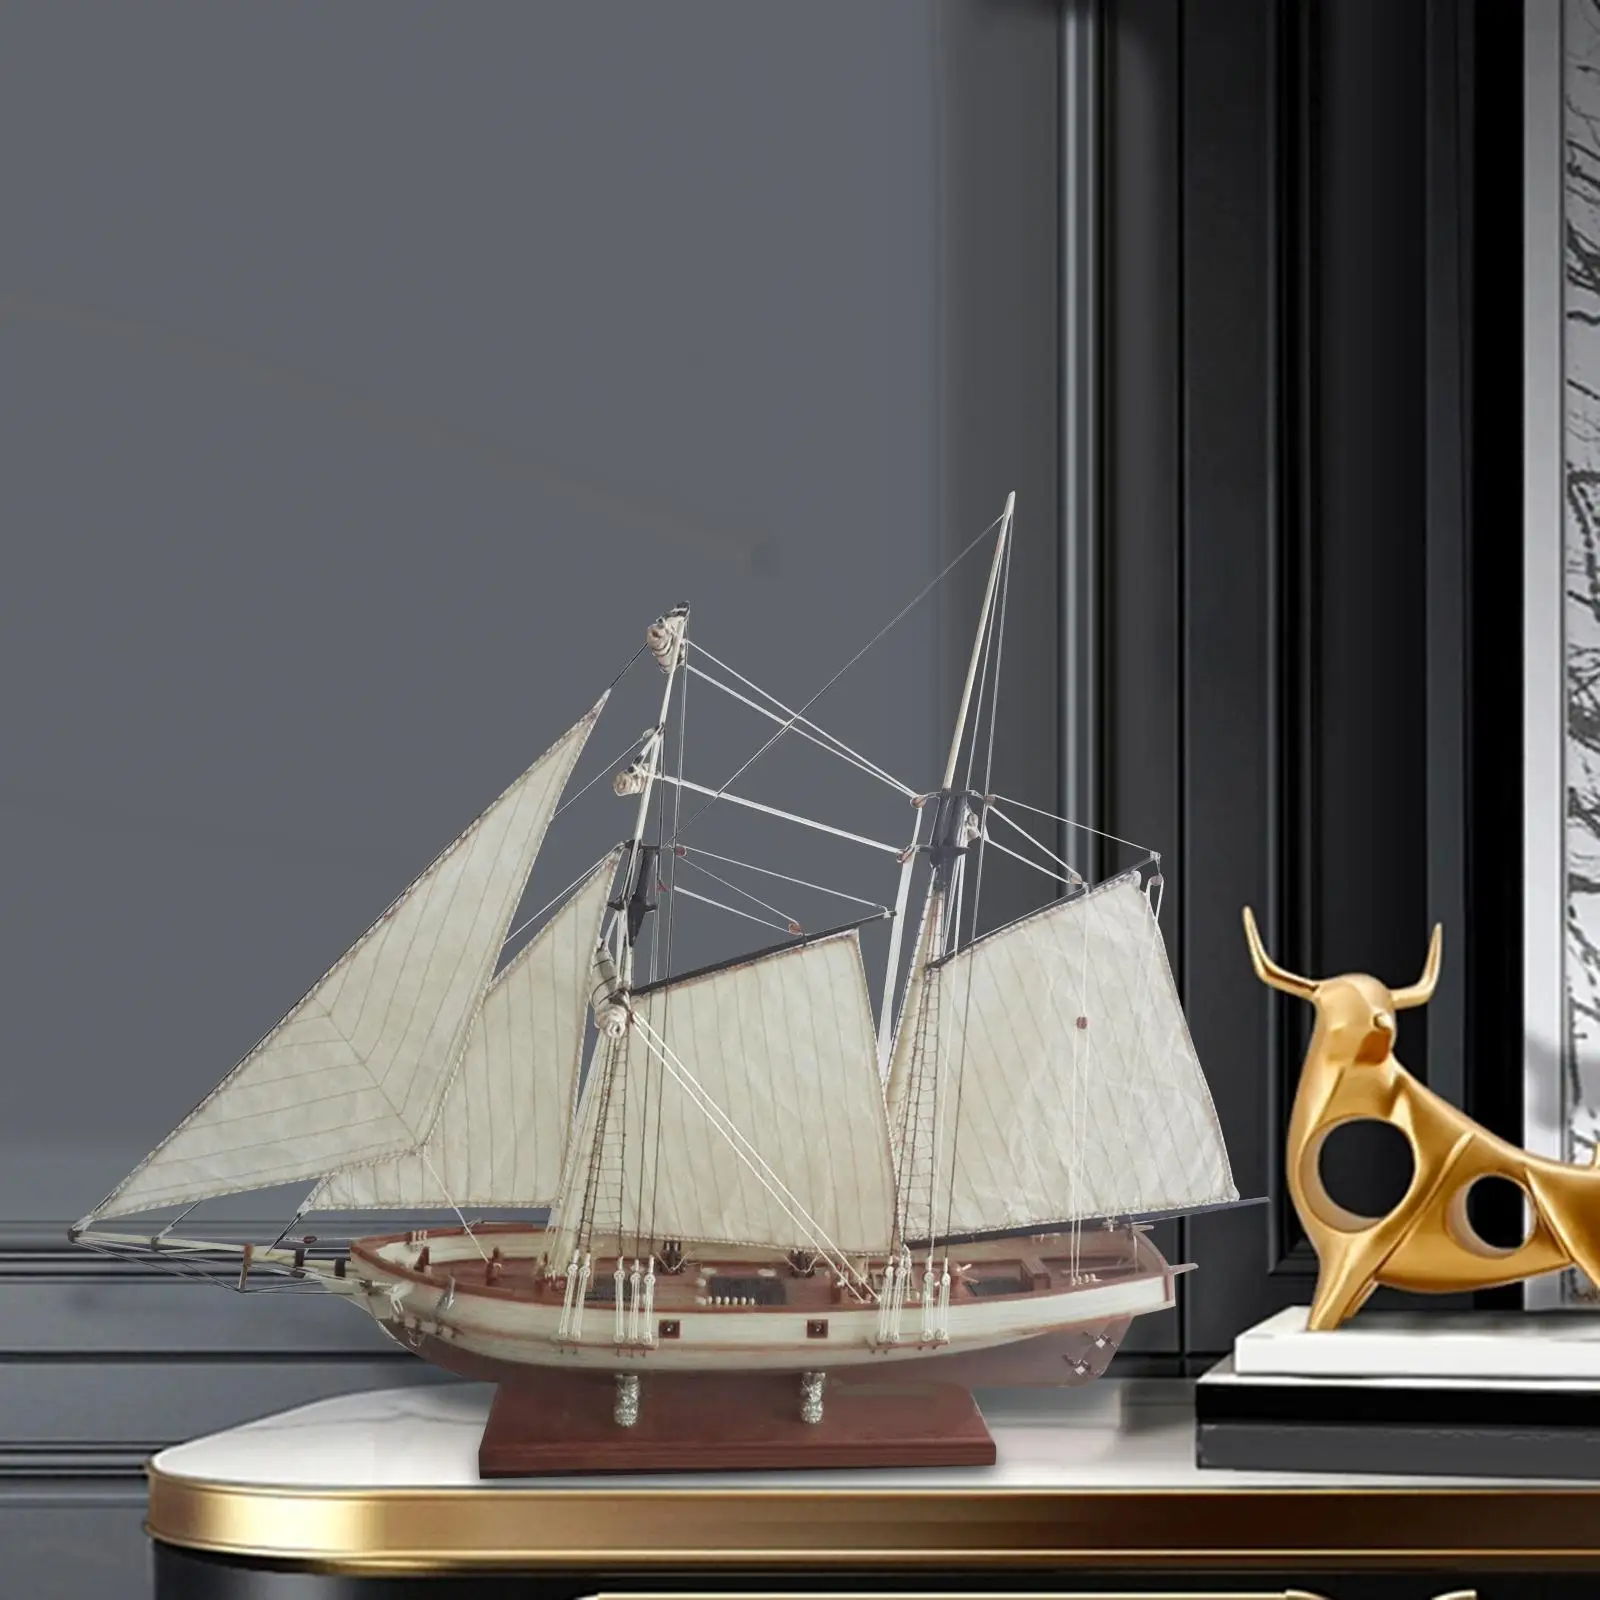 1/70 Nautical Sailing Boat Model Kits Sailboat Wood Model Building Kits Ship Unfinished 3D Puzzle for Desk Decor Kids and Adults